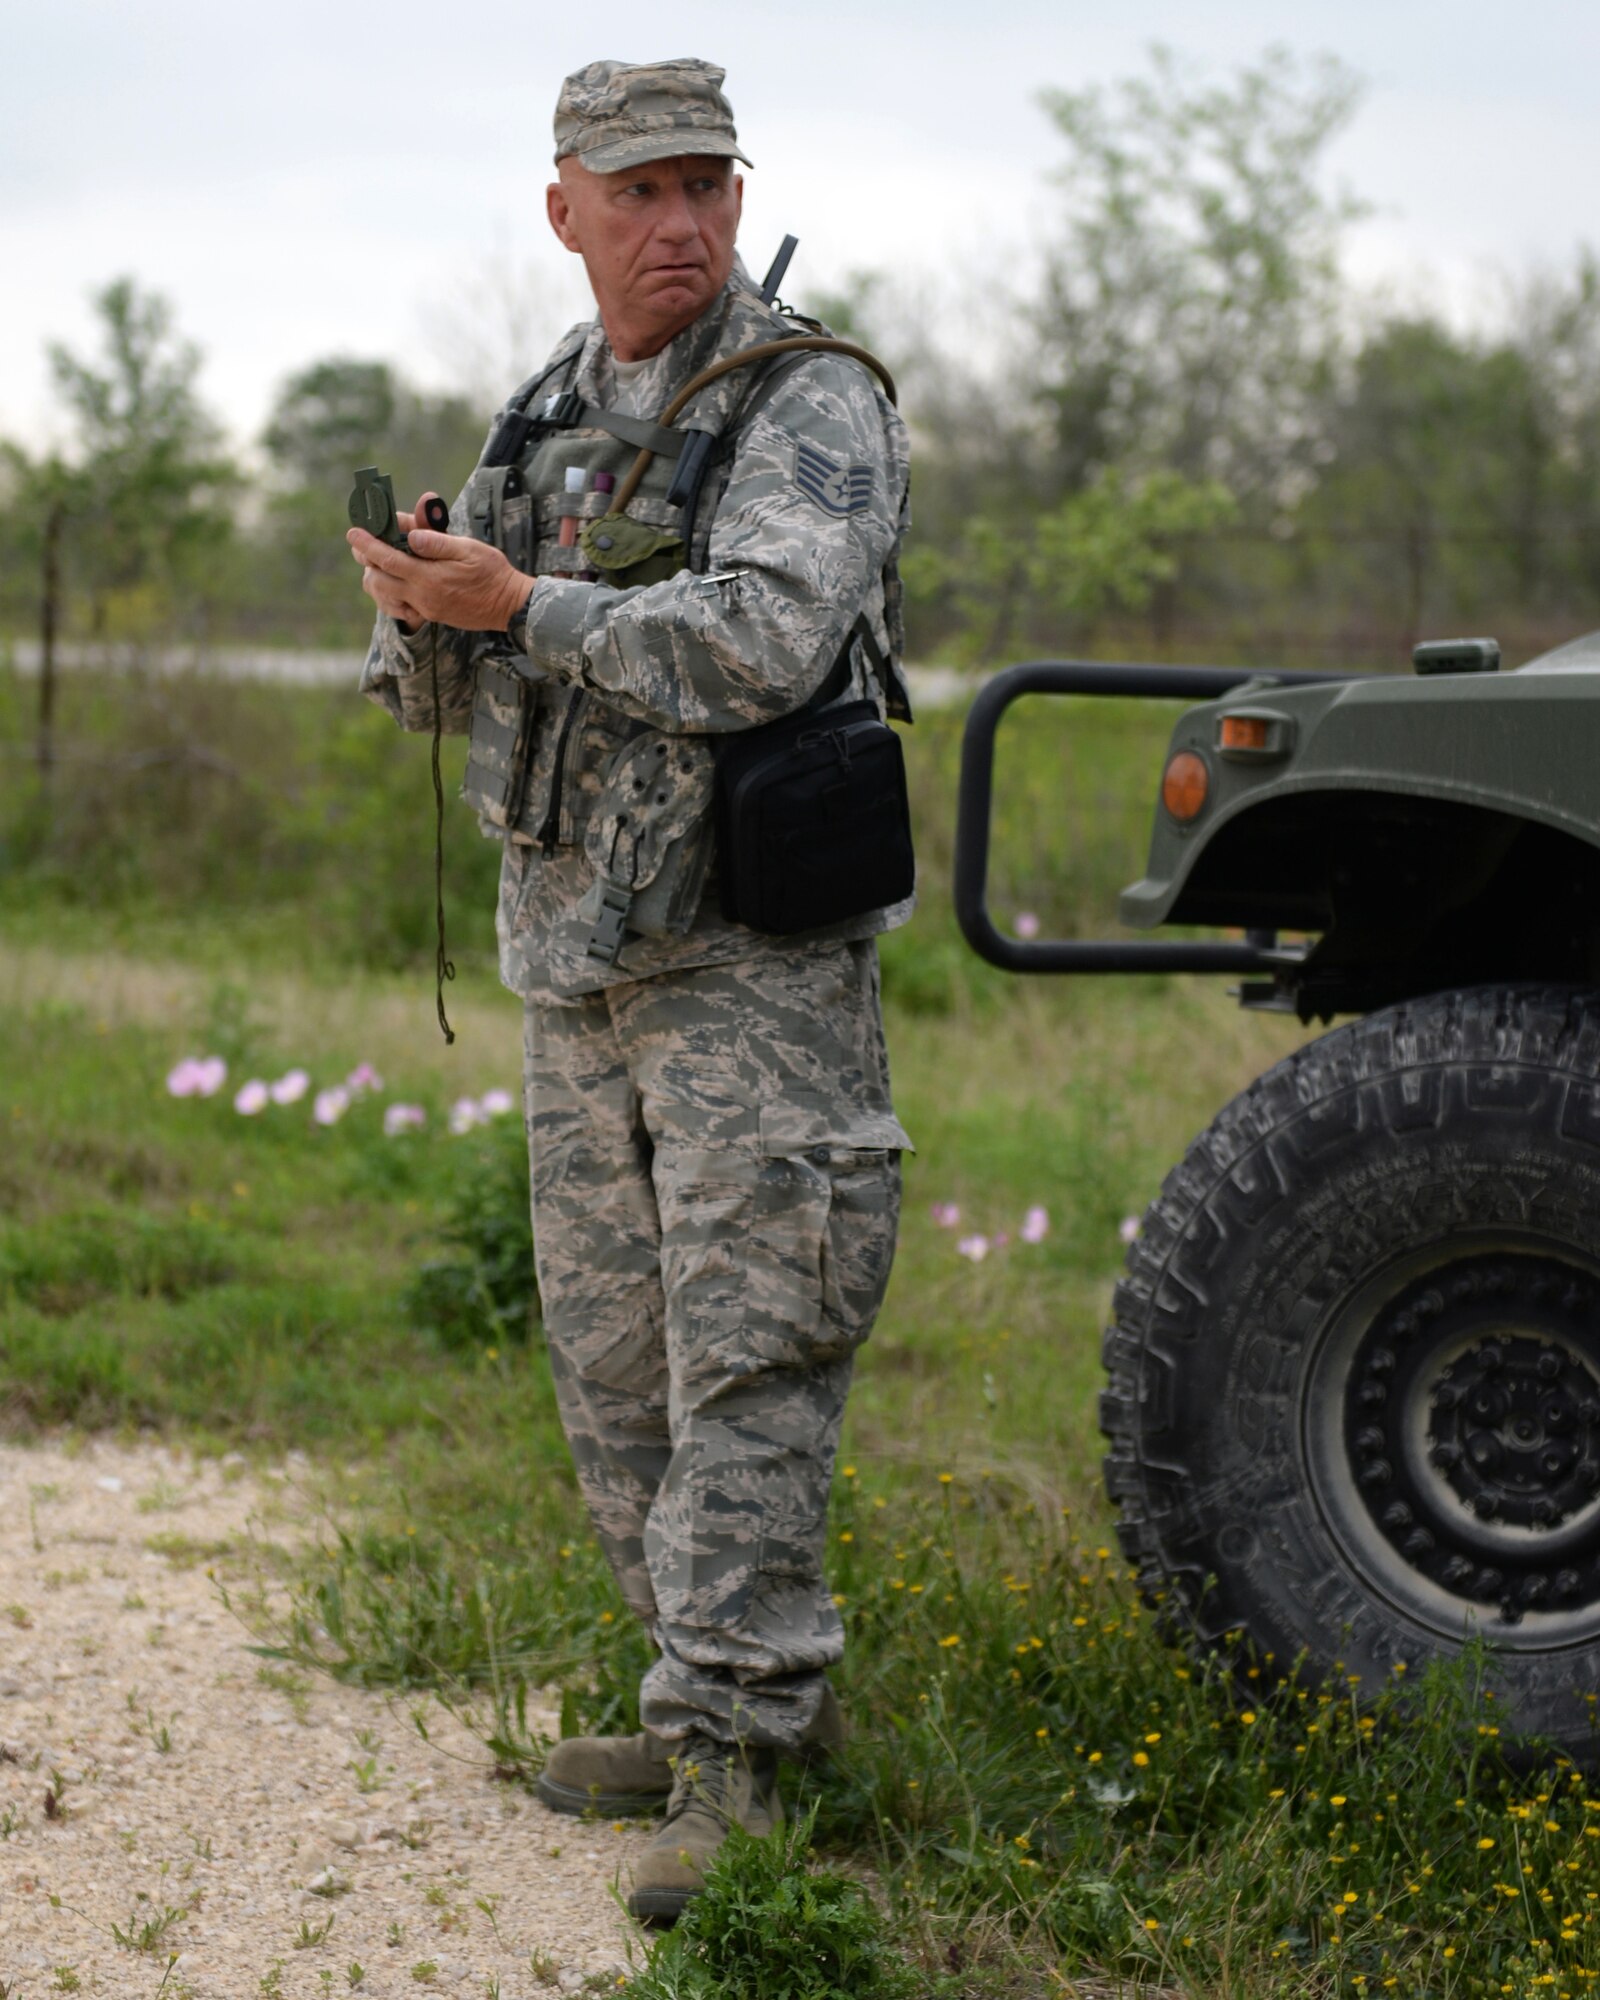 A vehicle maintenance airman with the 147th Air Support Operations Squadron, 147th Reconnaissance Wing, based at Ellington Field Joint Reserve Base in Houston, Texas, checks his compass during a field training exercise April 3, 2014, at Camp Swift in Bastrop, Texas. The support personnel participated in the annual exercise to test the requirements necessitated by being members of an ASOS unit.